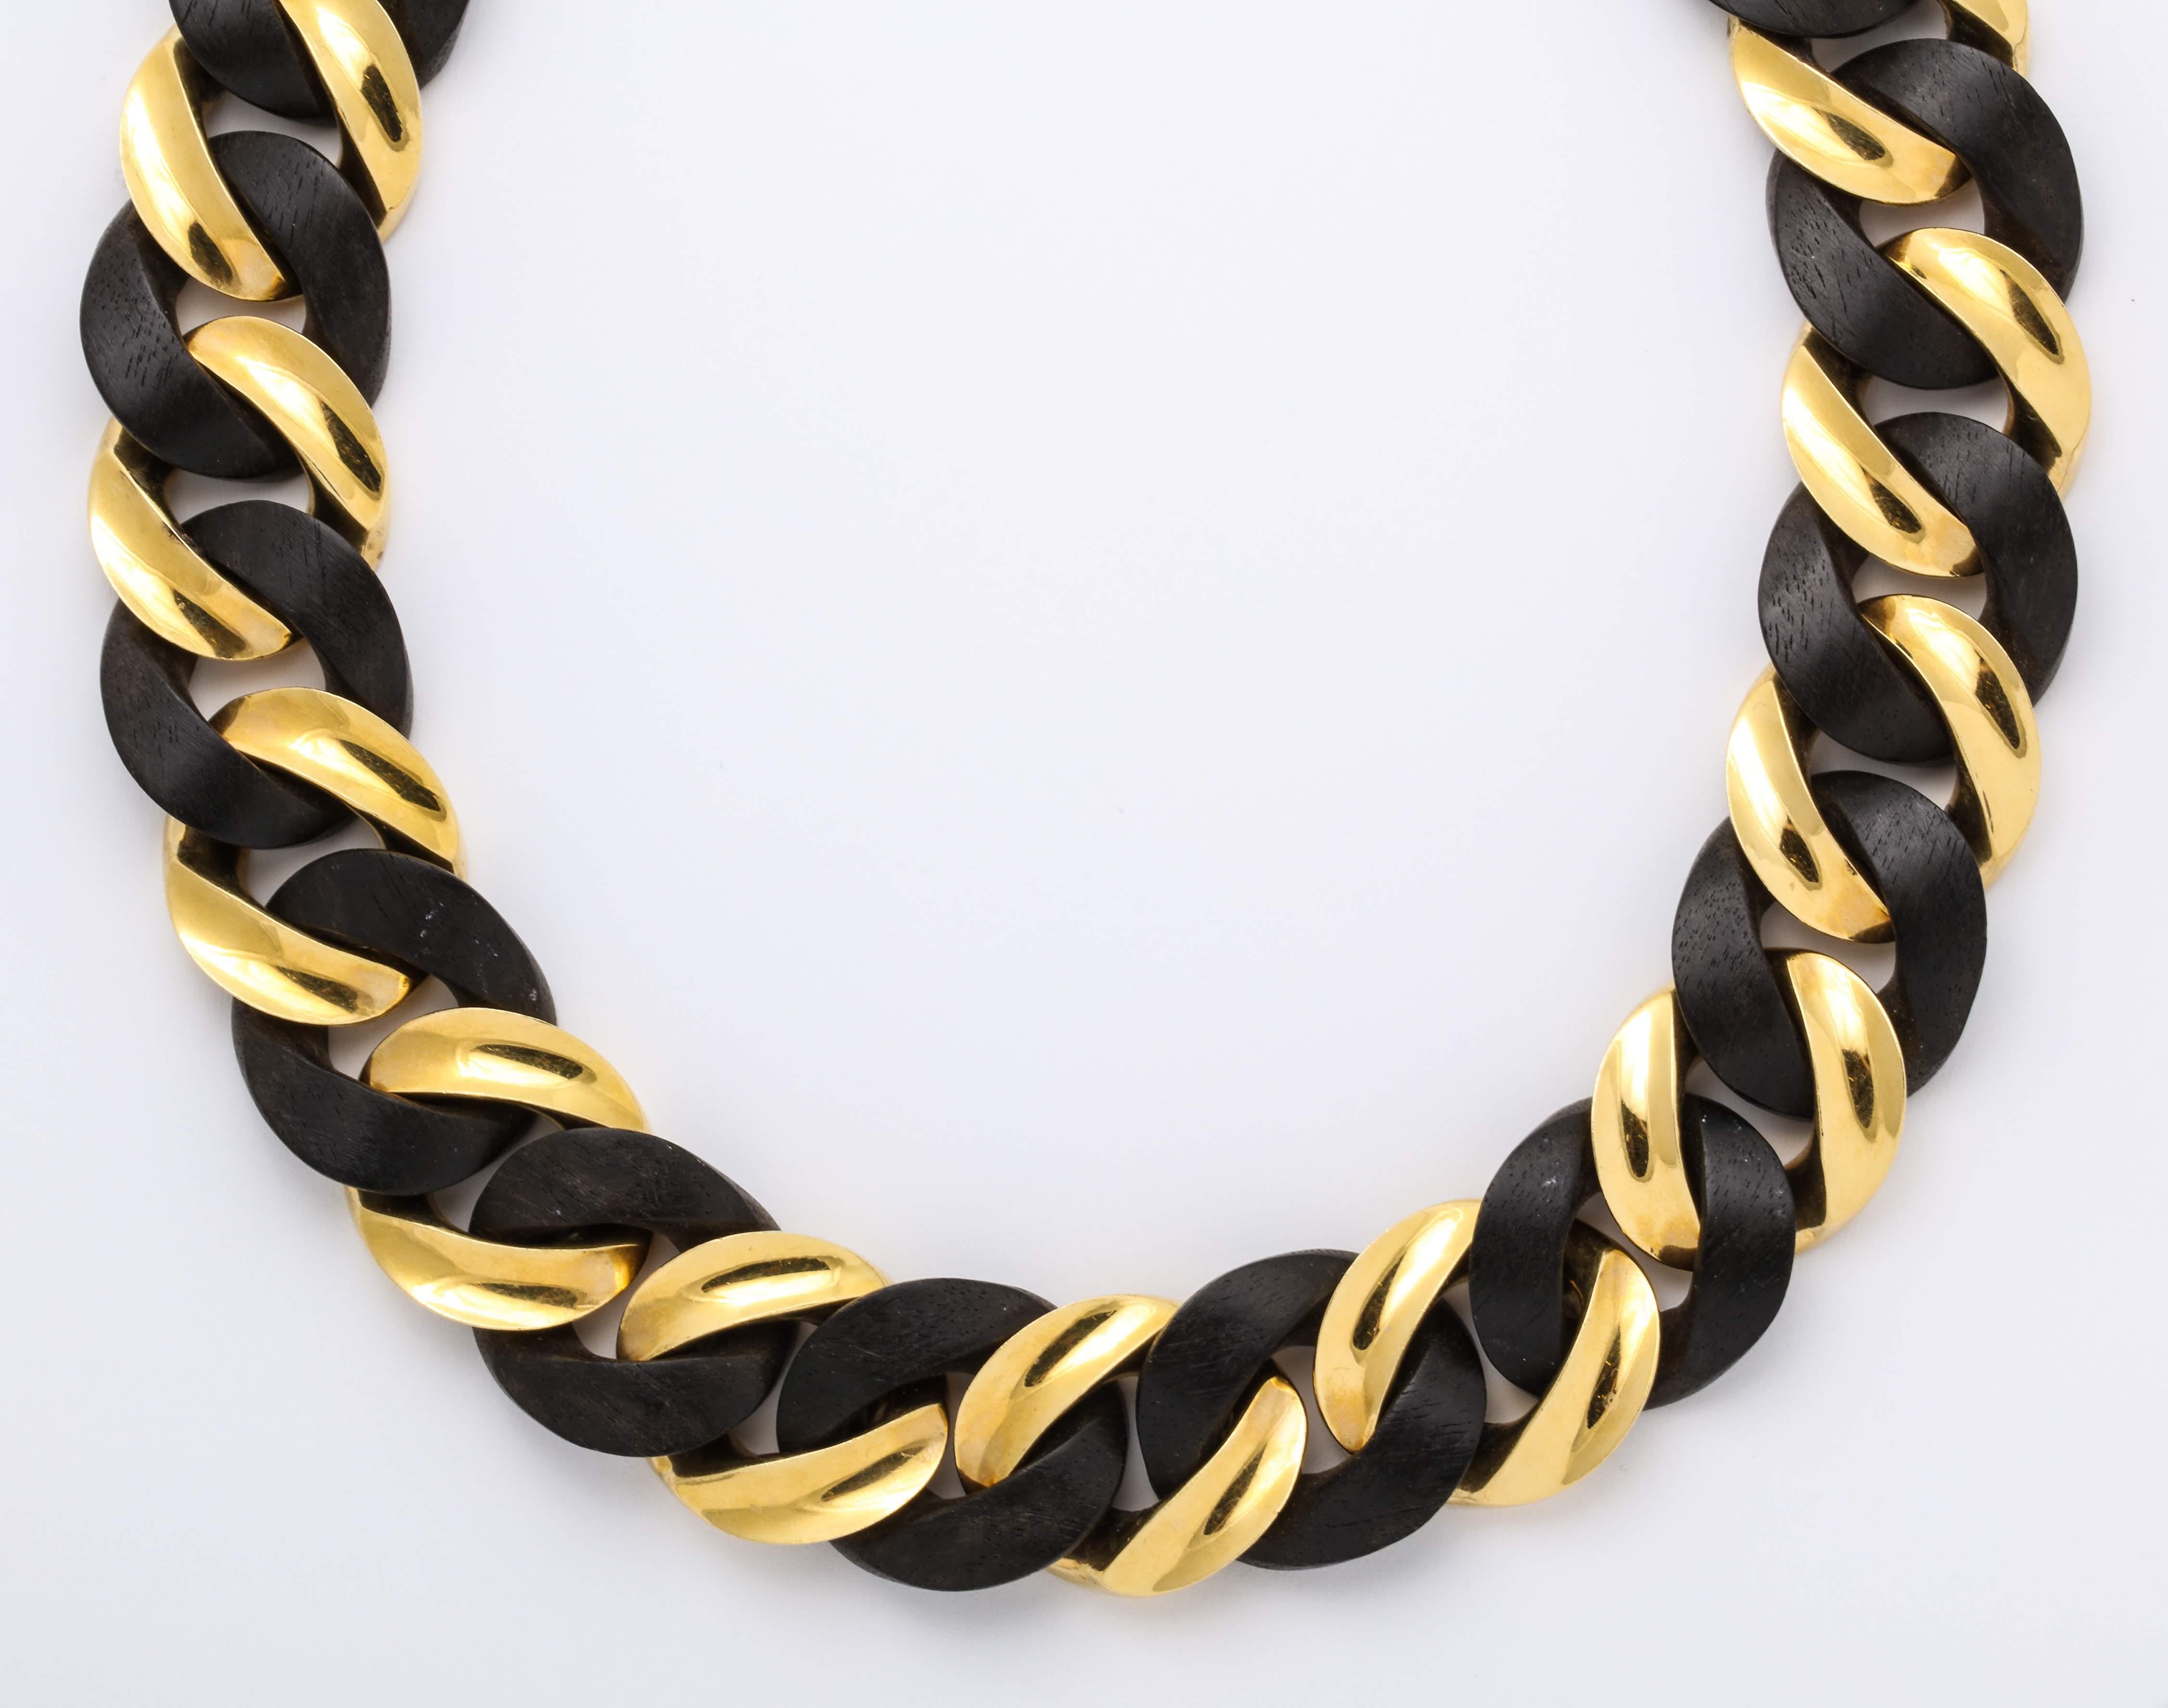 Urban and chic 18 Karat yellow gold concave curb links alternating with convex ebony wood link necklace.

Dimensions: Length: 17 1/2 inches  Width: 15/16 inches  Elevation: 1/4 inches

Matching bracelet sold separately.